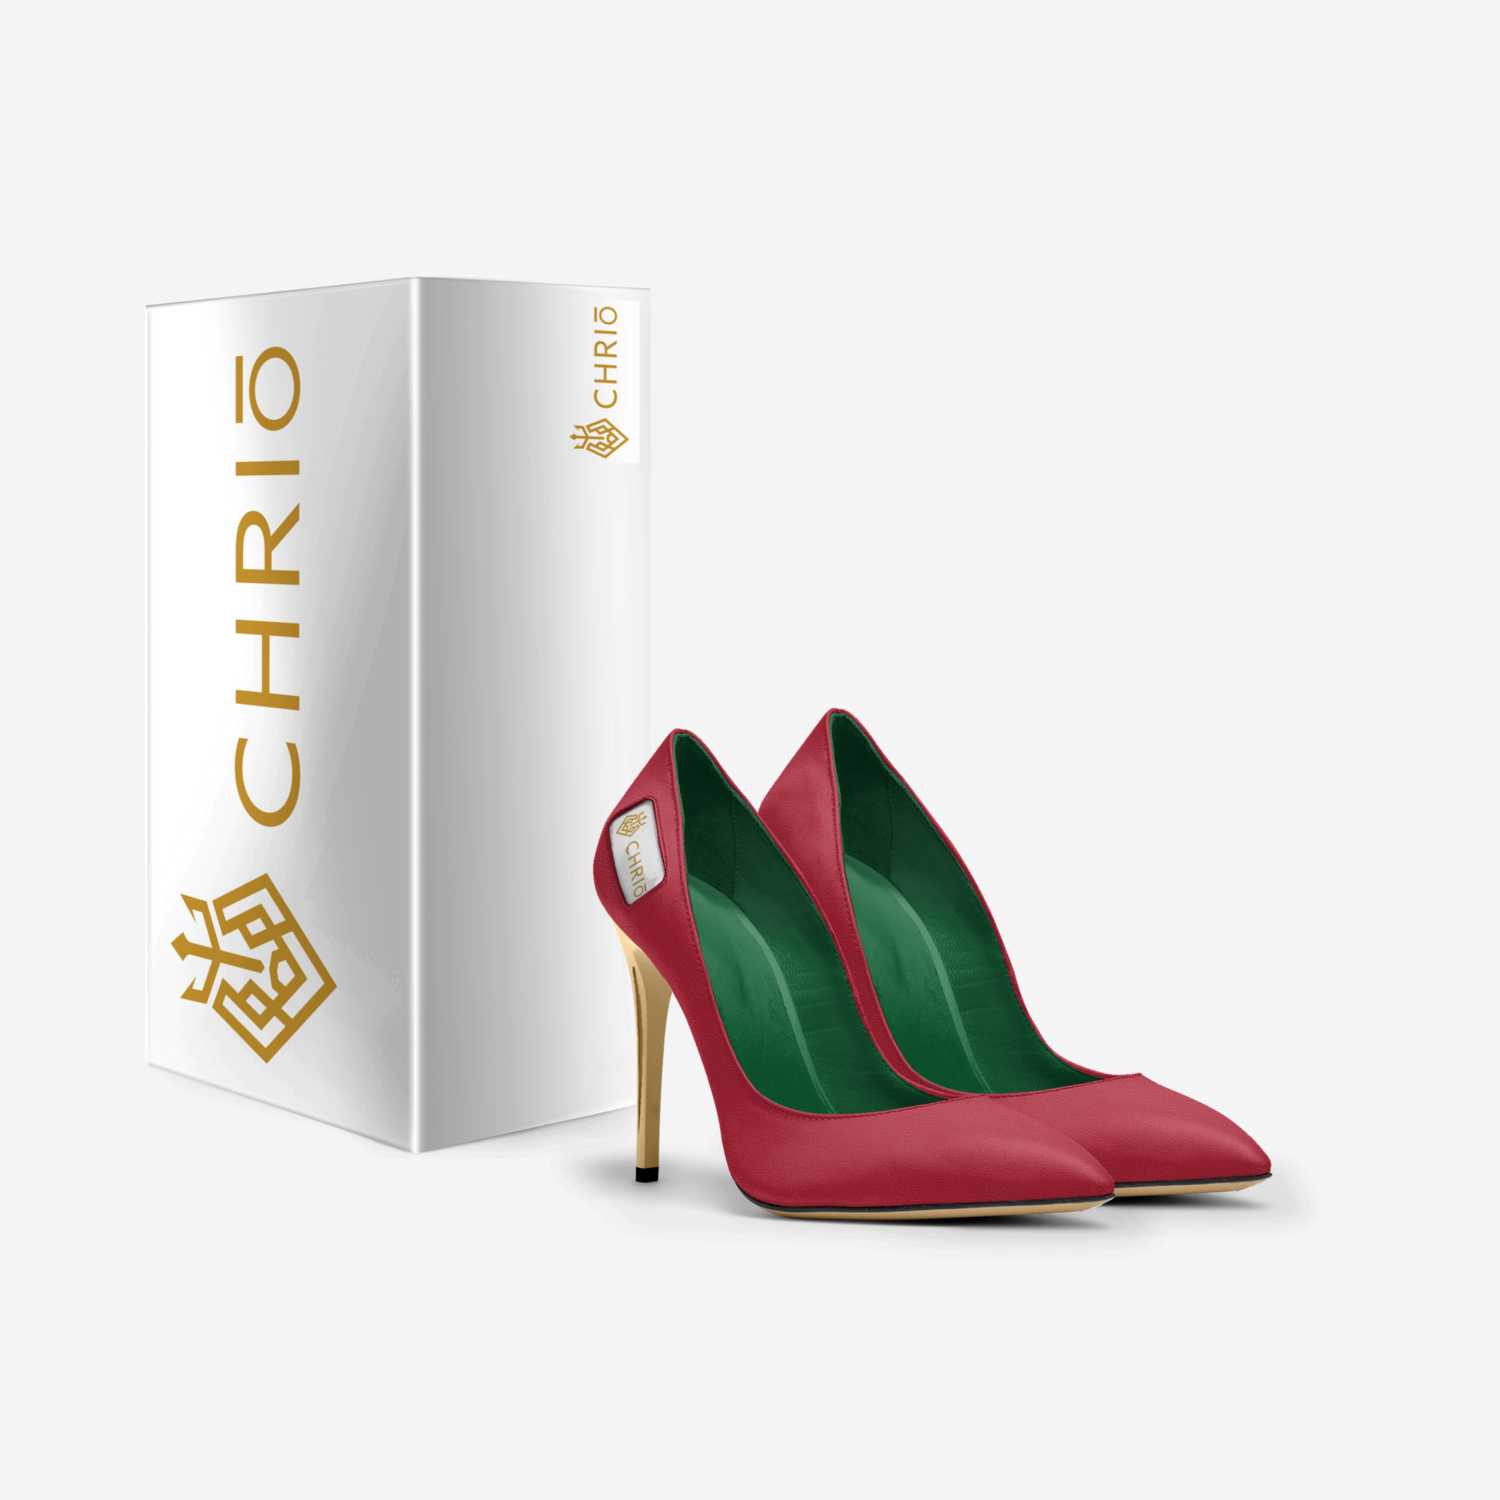 CHRIō custom made in Italy shoes by Hakeem Collins | Box view